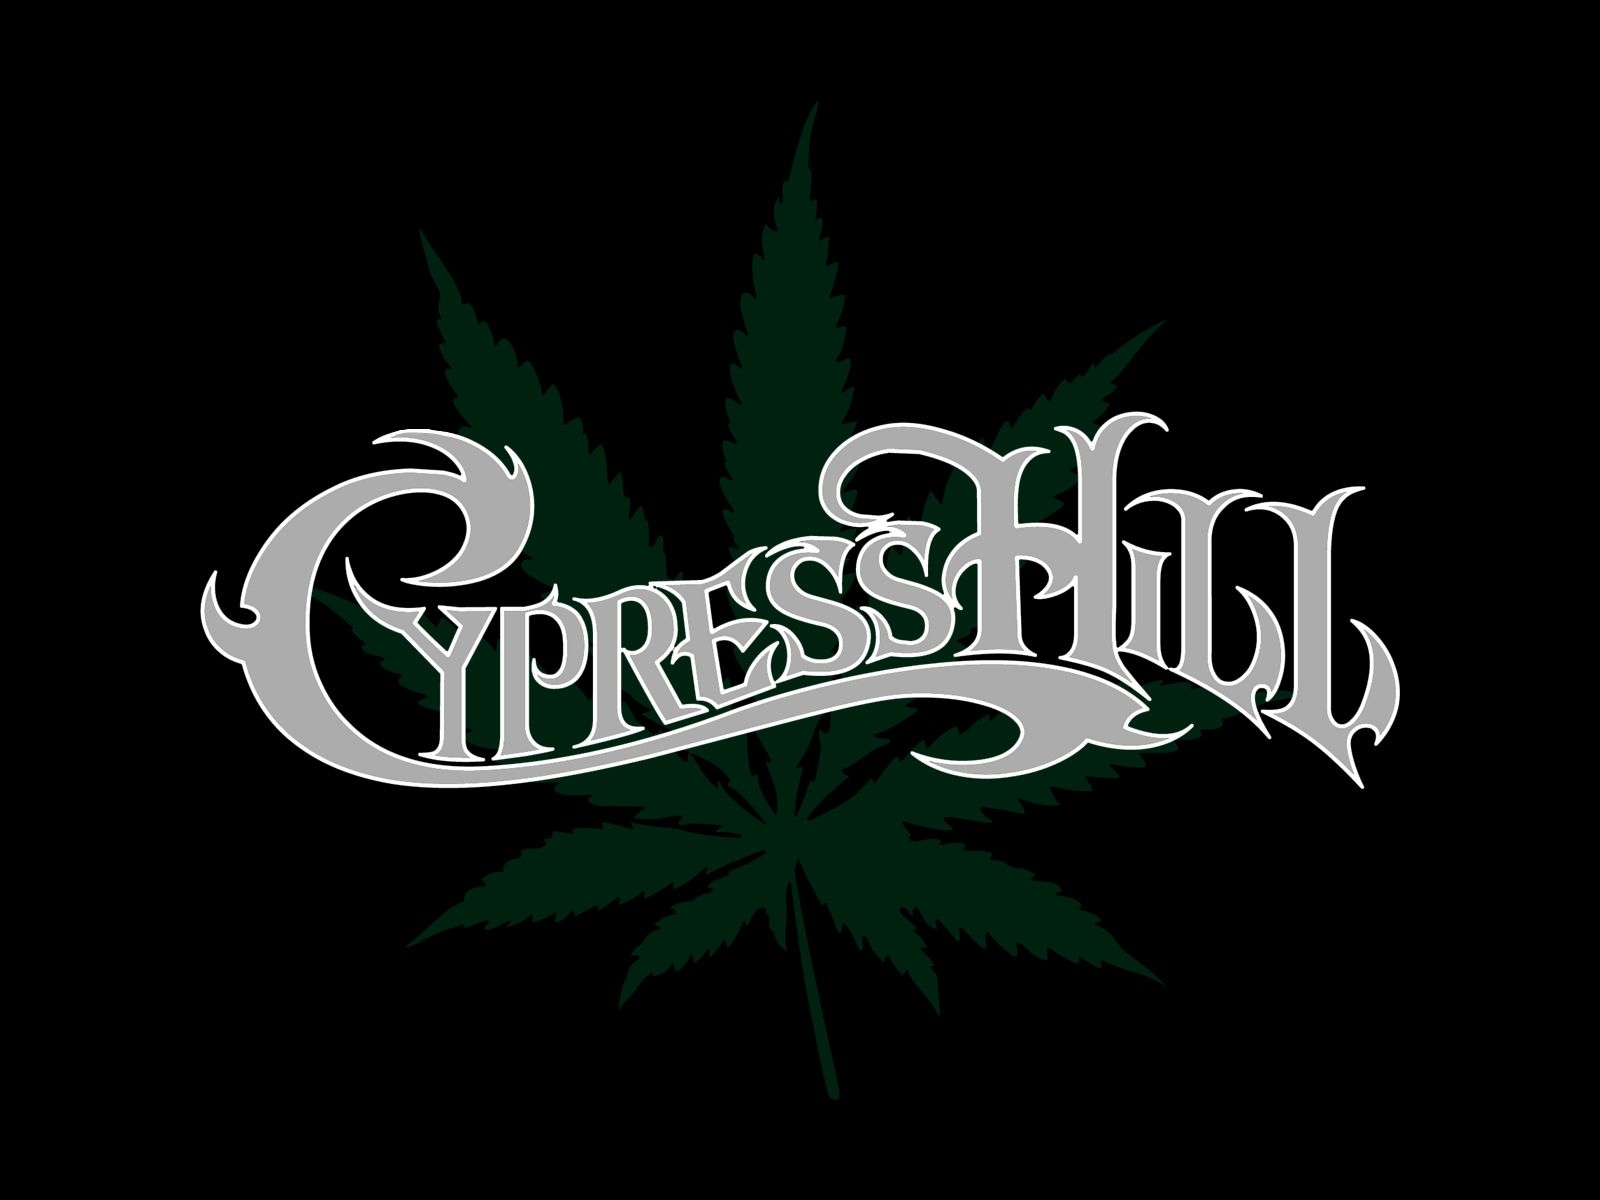 Shady19  CYPRESS HILL  Wallpaper Details  Download